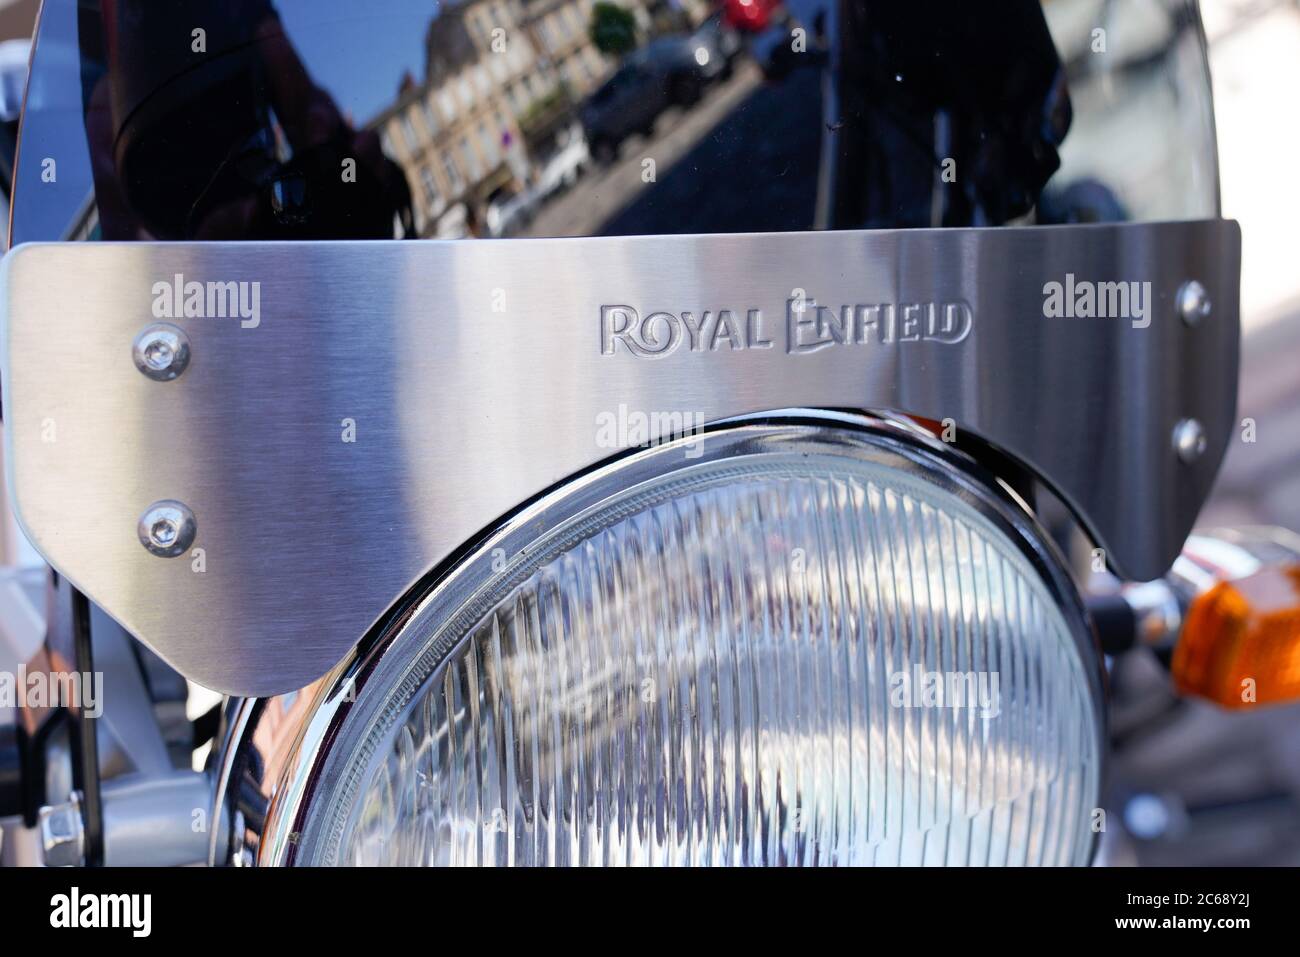 Bordeaux , Aquitaine / France - 07 06 2020 : Royal Enfield logo on front of motorbike headlamp of Indian manufactured motorcycle Stock Photo